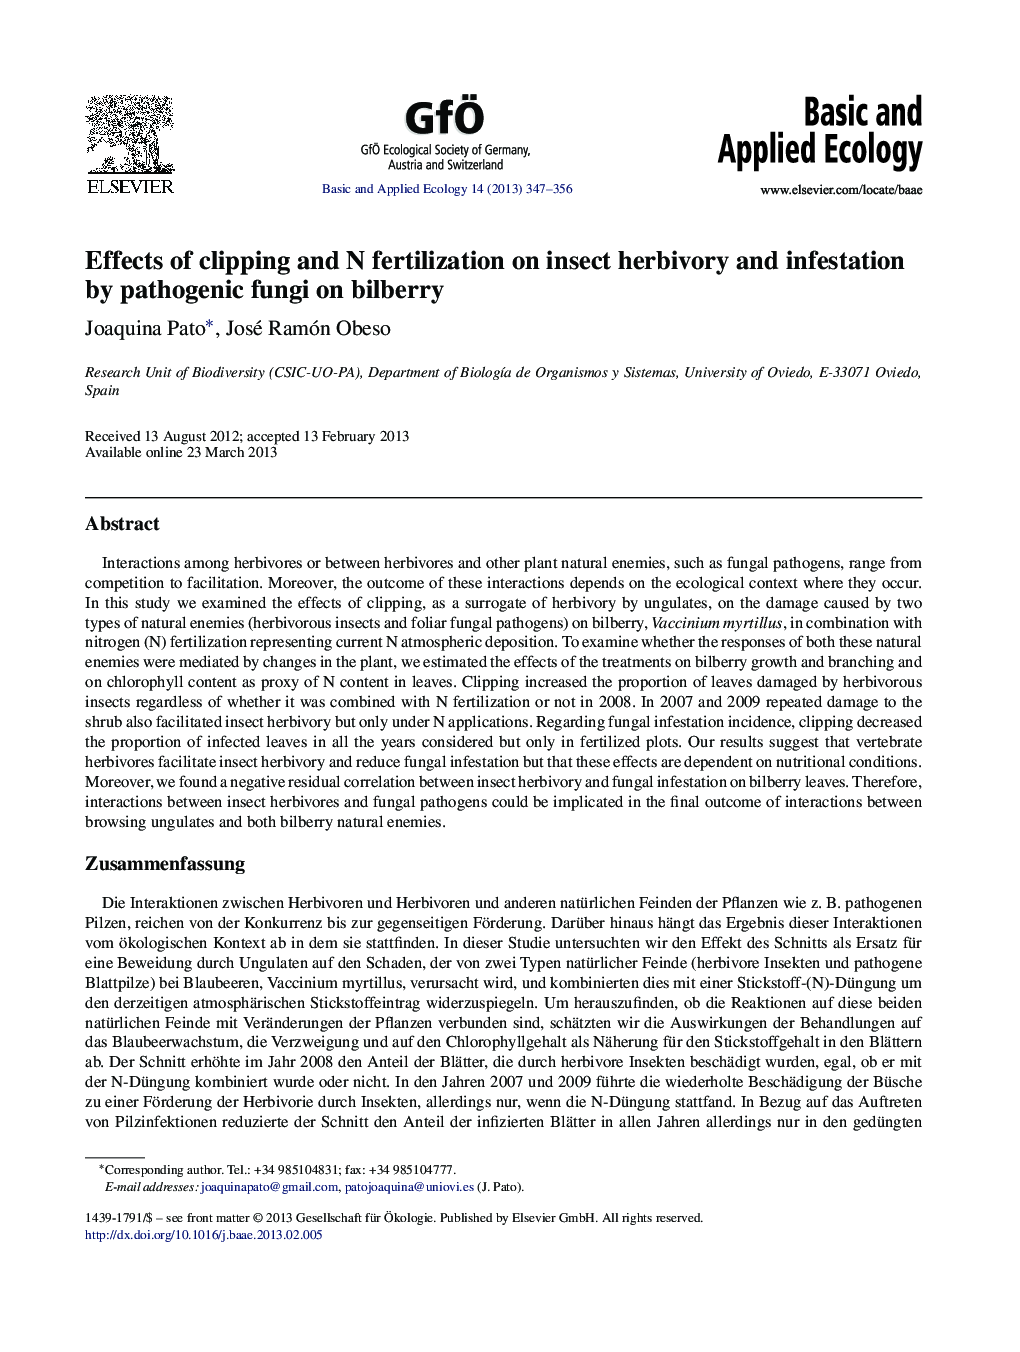 Effects of clipping and N fertilization on insect herbivory and infestation by pathogenic fungi on bilberry